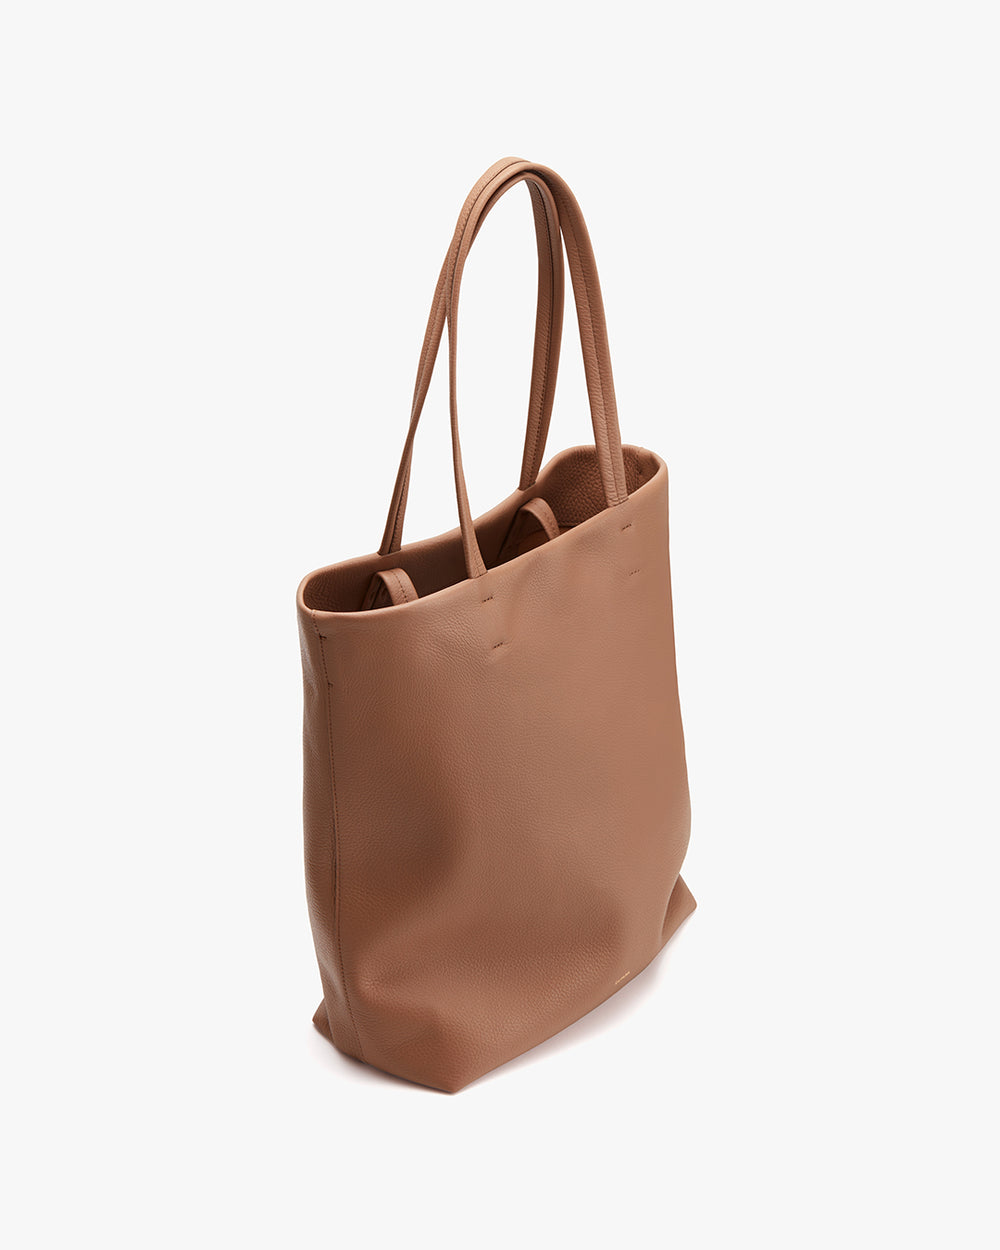 Leather tote bag standing upright on a plain background.